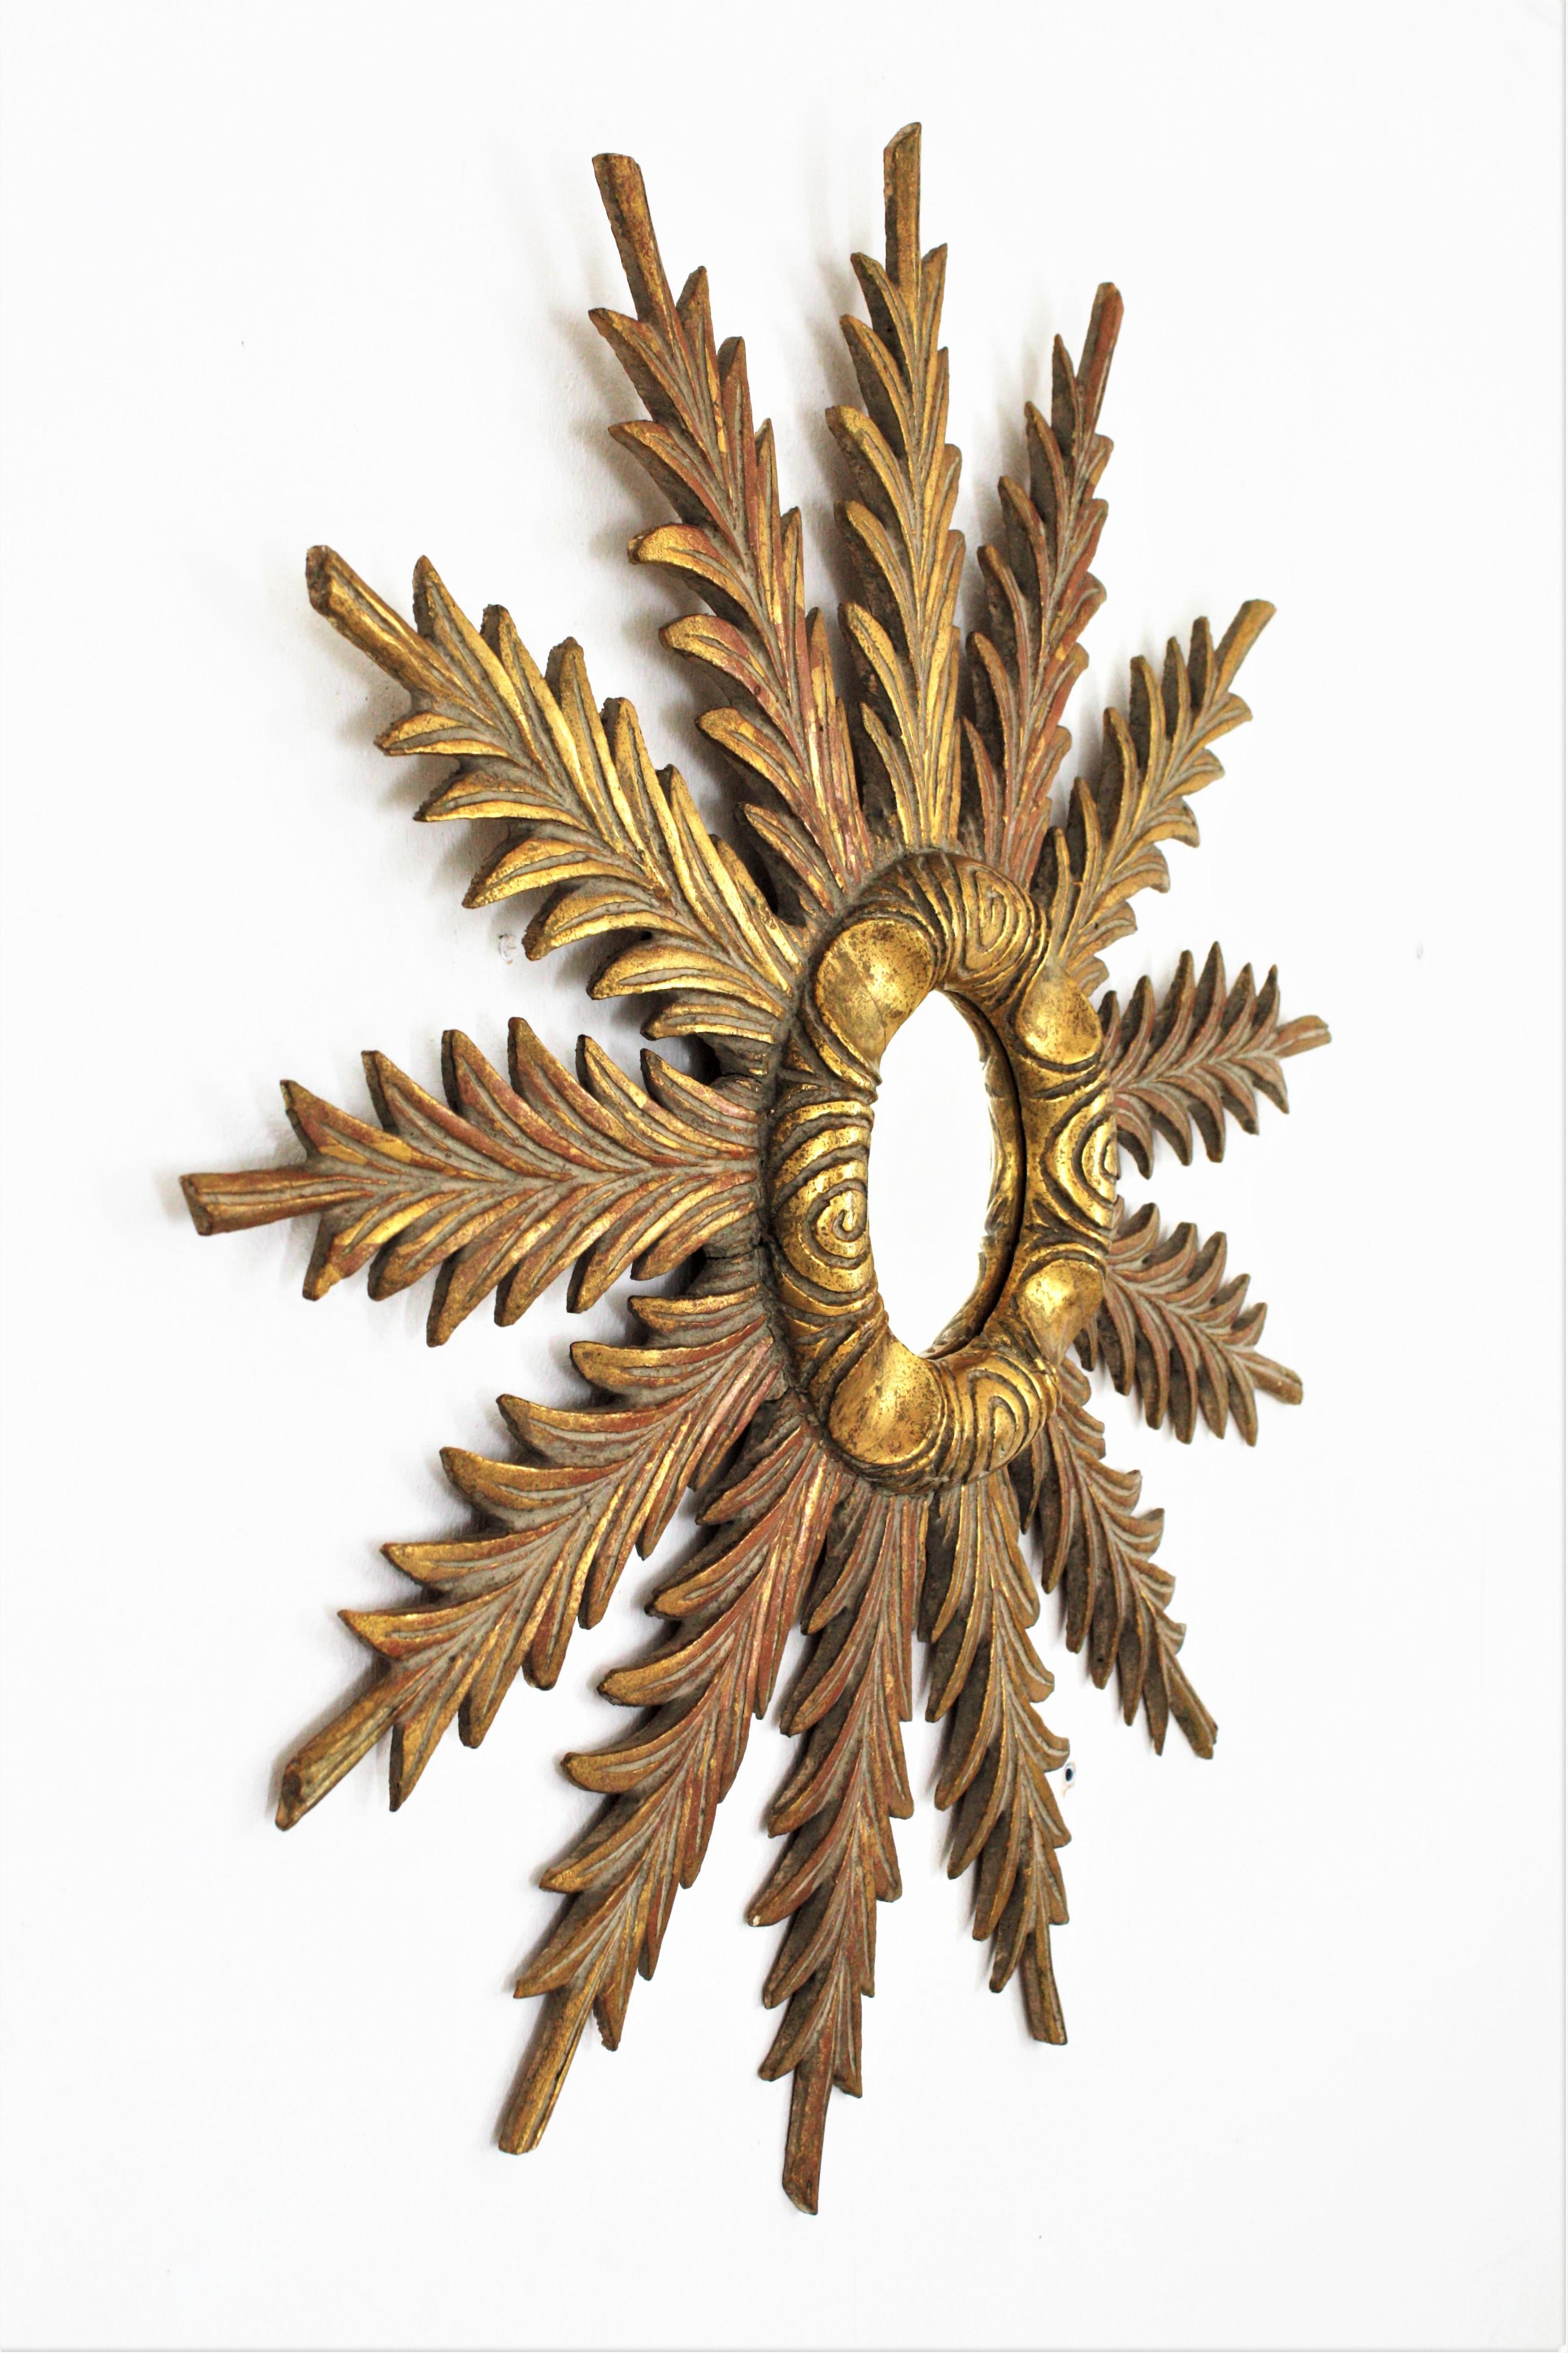 Sunburst Starburst Giltwood Mirror with Foliage Carvings, 1940s For Sale 3